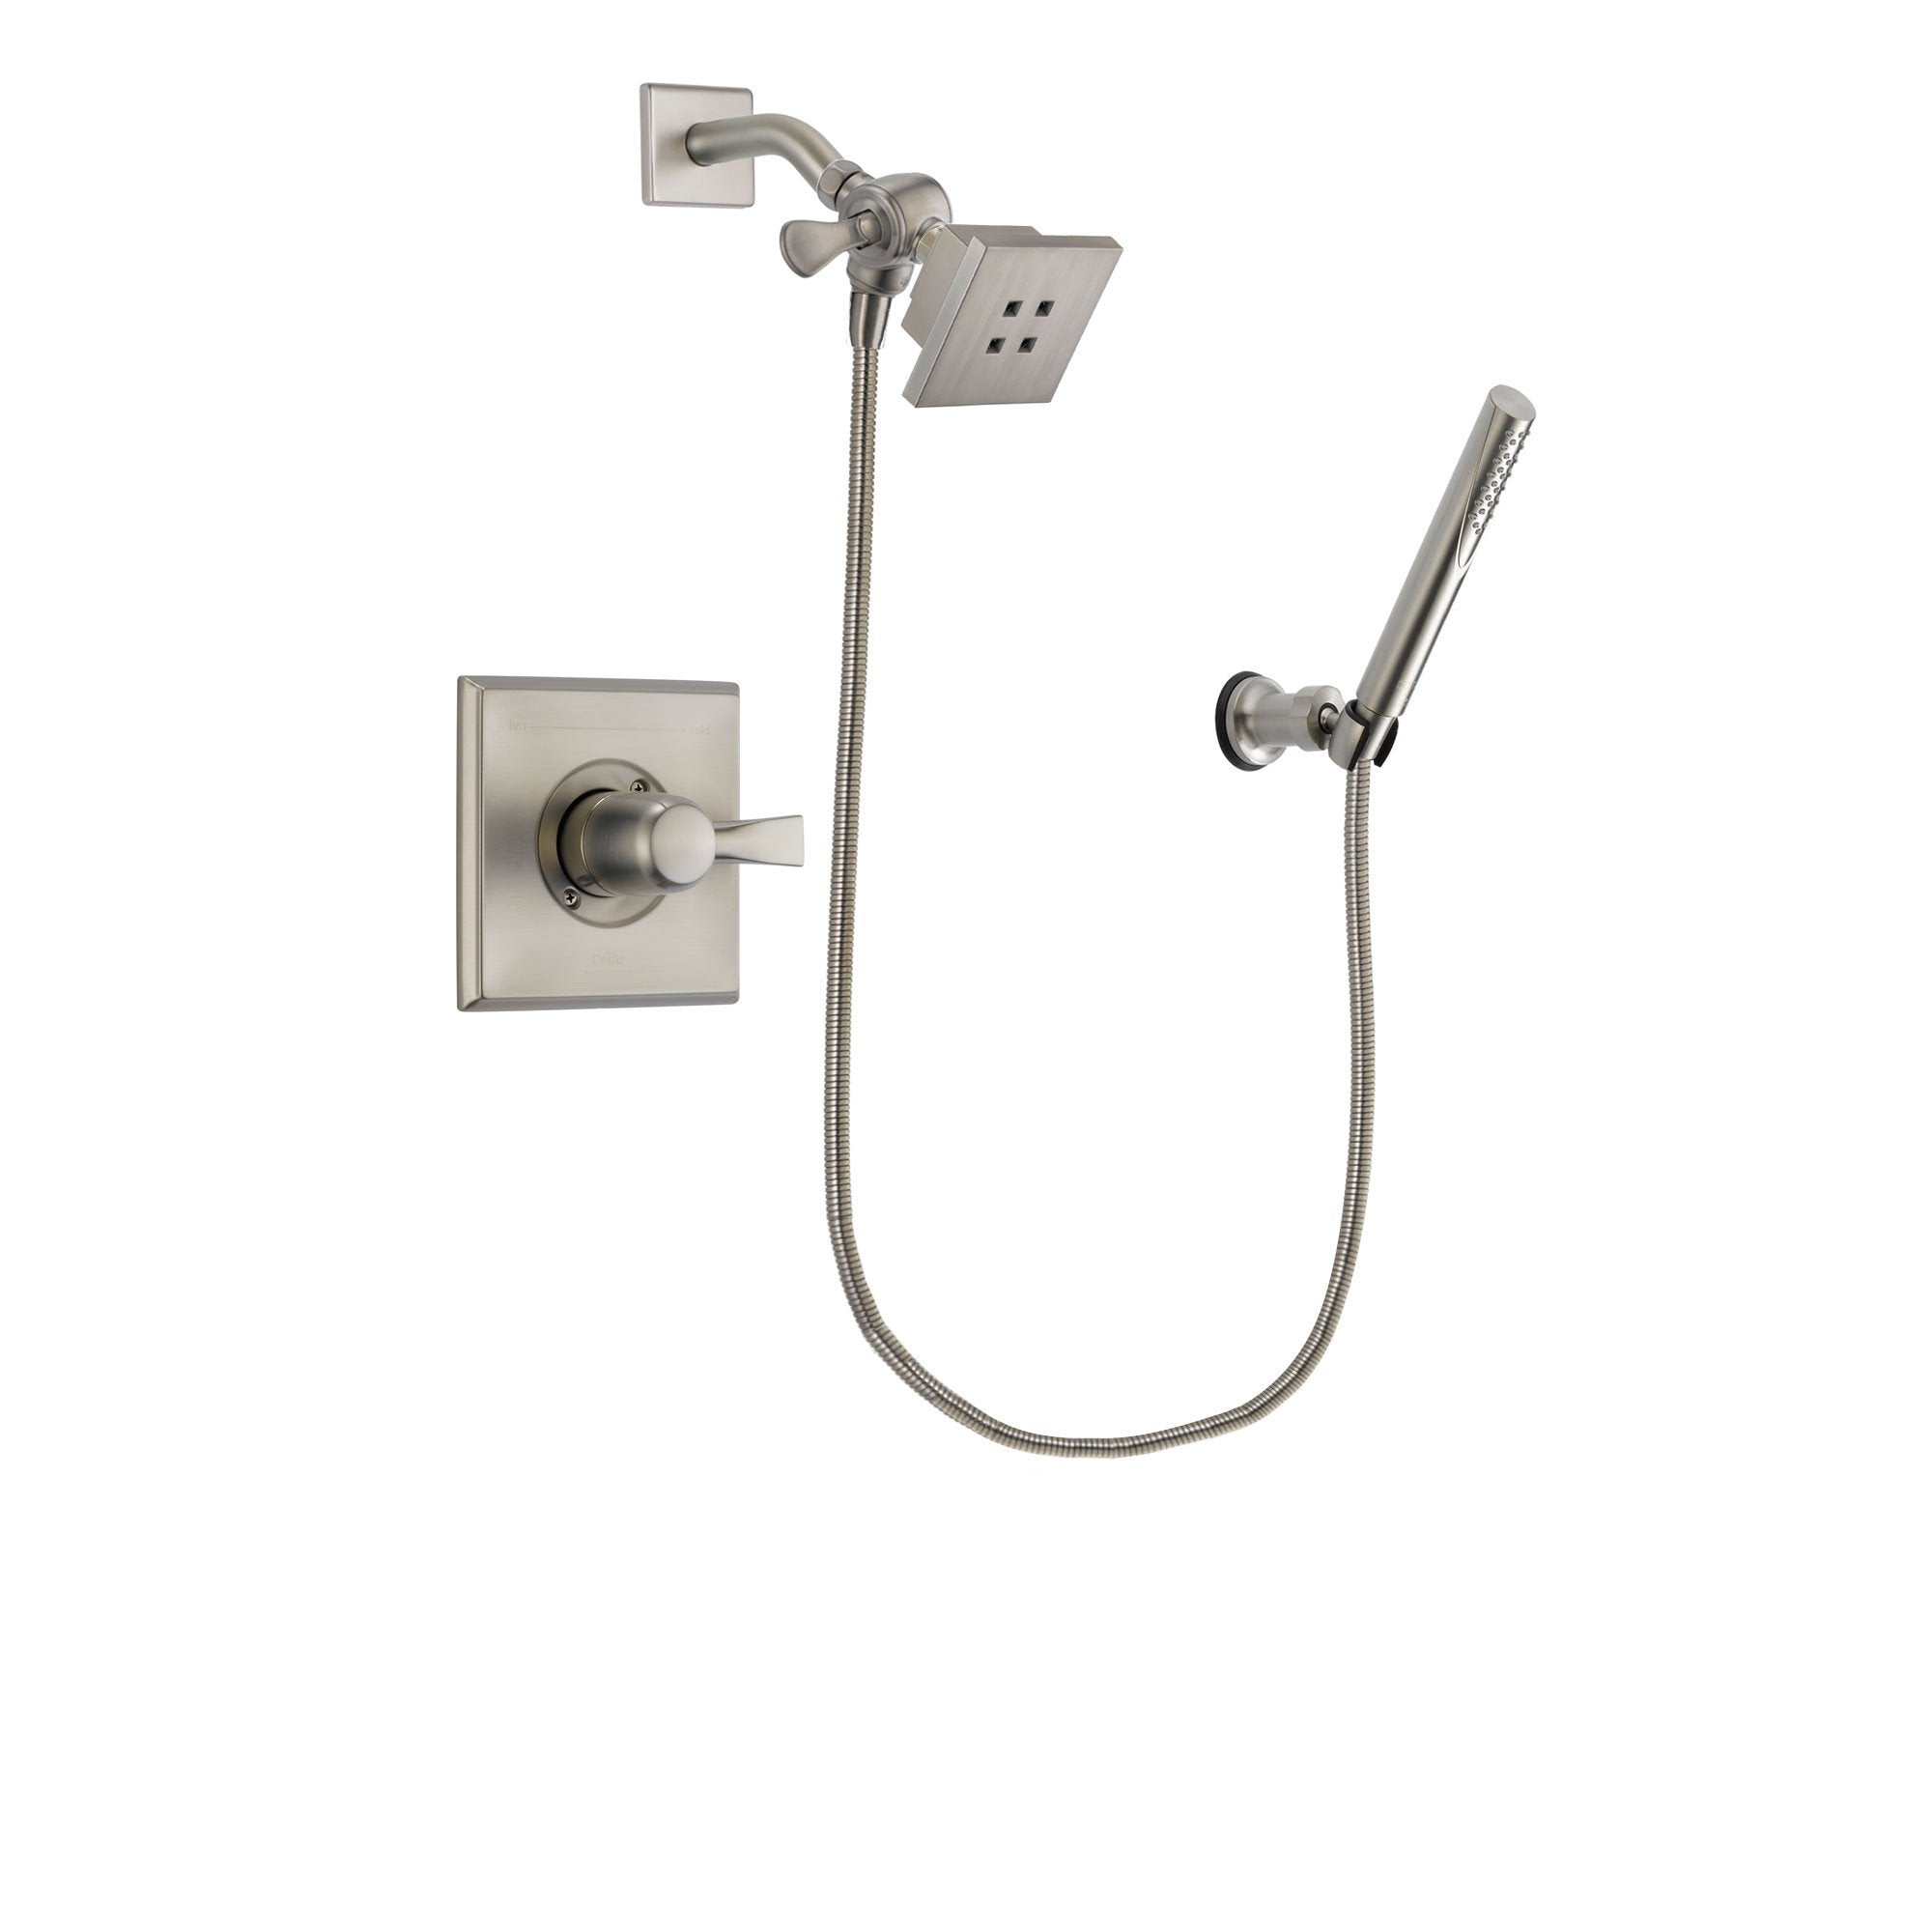 Delta Dryden Stainless Steel Finish Shower Faucet System Package with Square Showerhead and Modern Handheld Shower Spray Includes Rough-in Valve DSP2118V